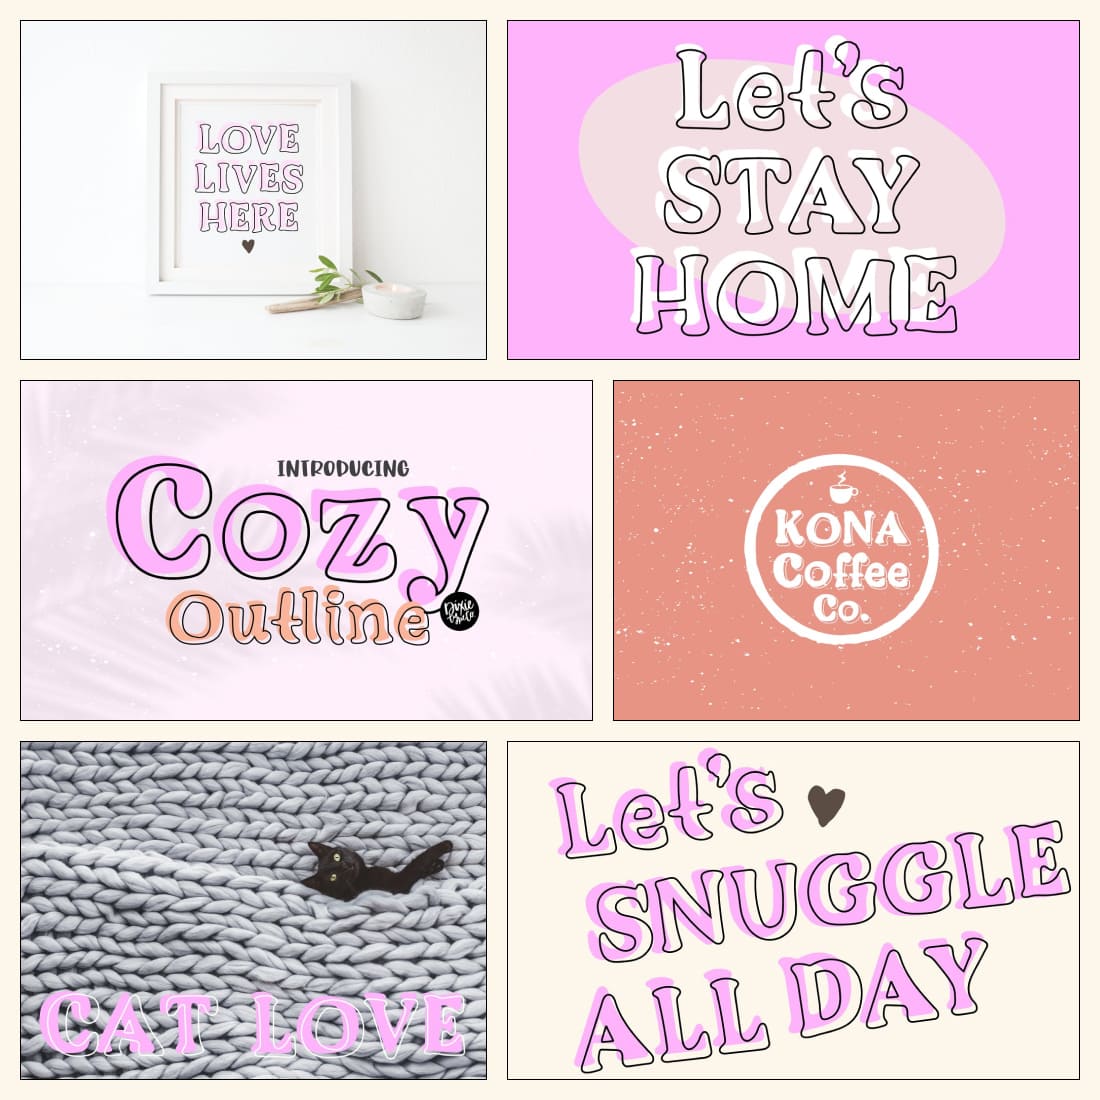 Introducing Cozy Outline - Six Pictures With Phrases.